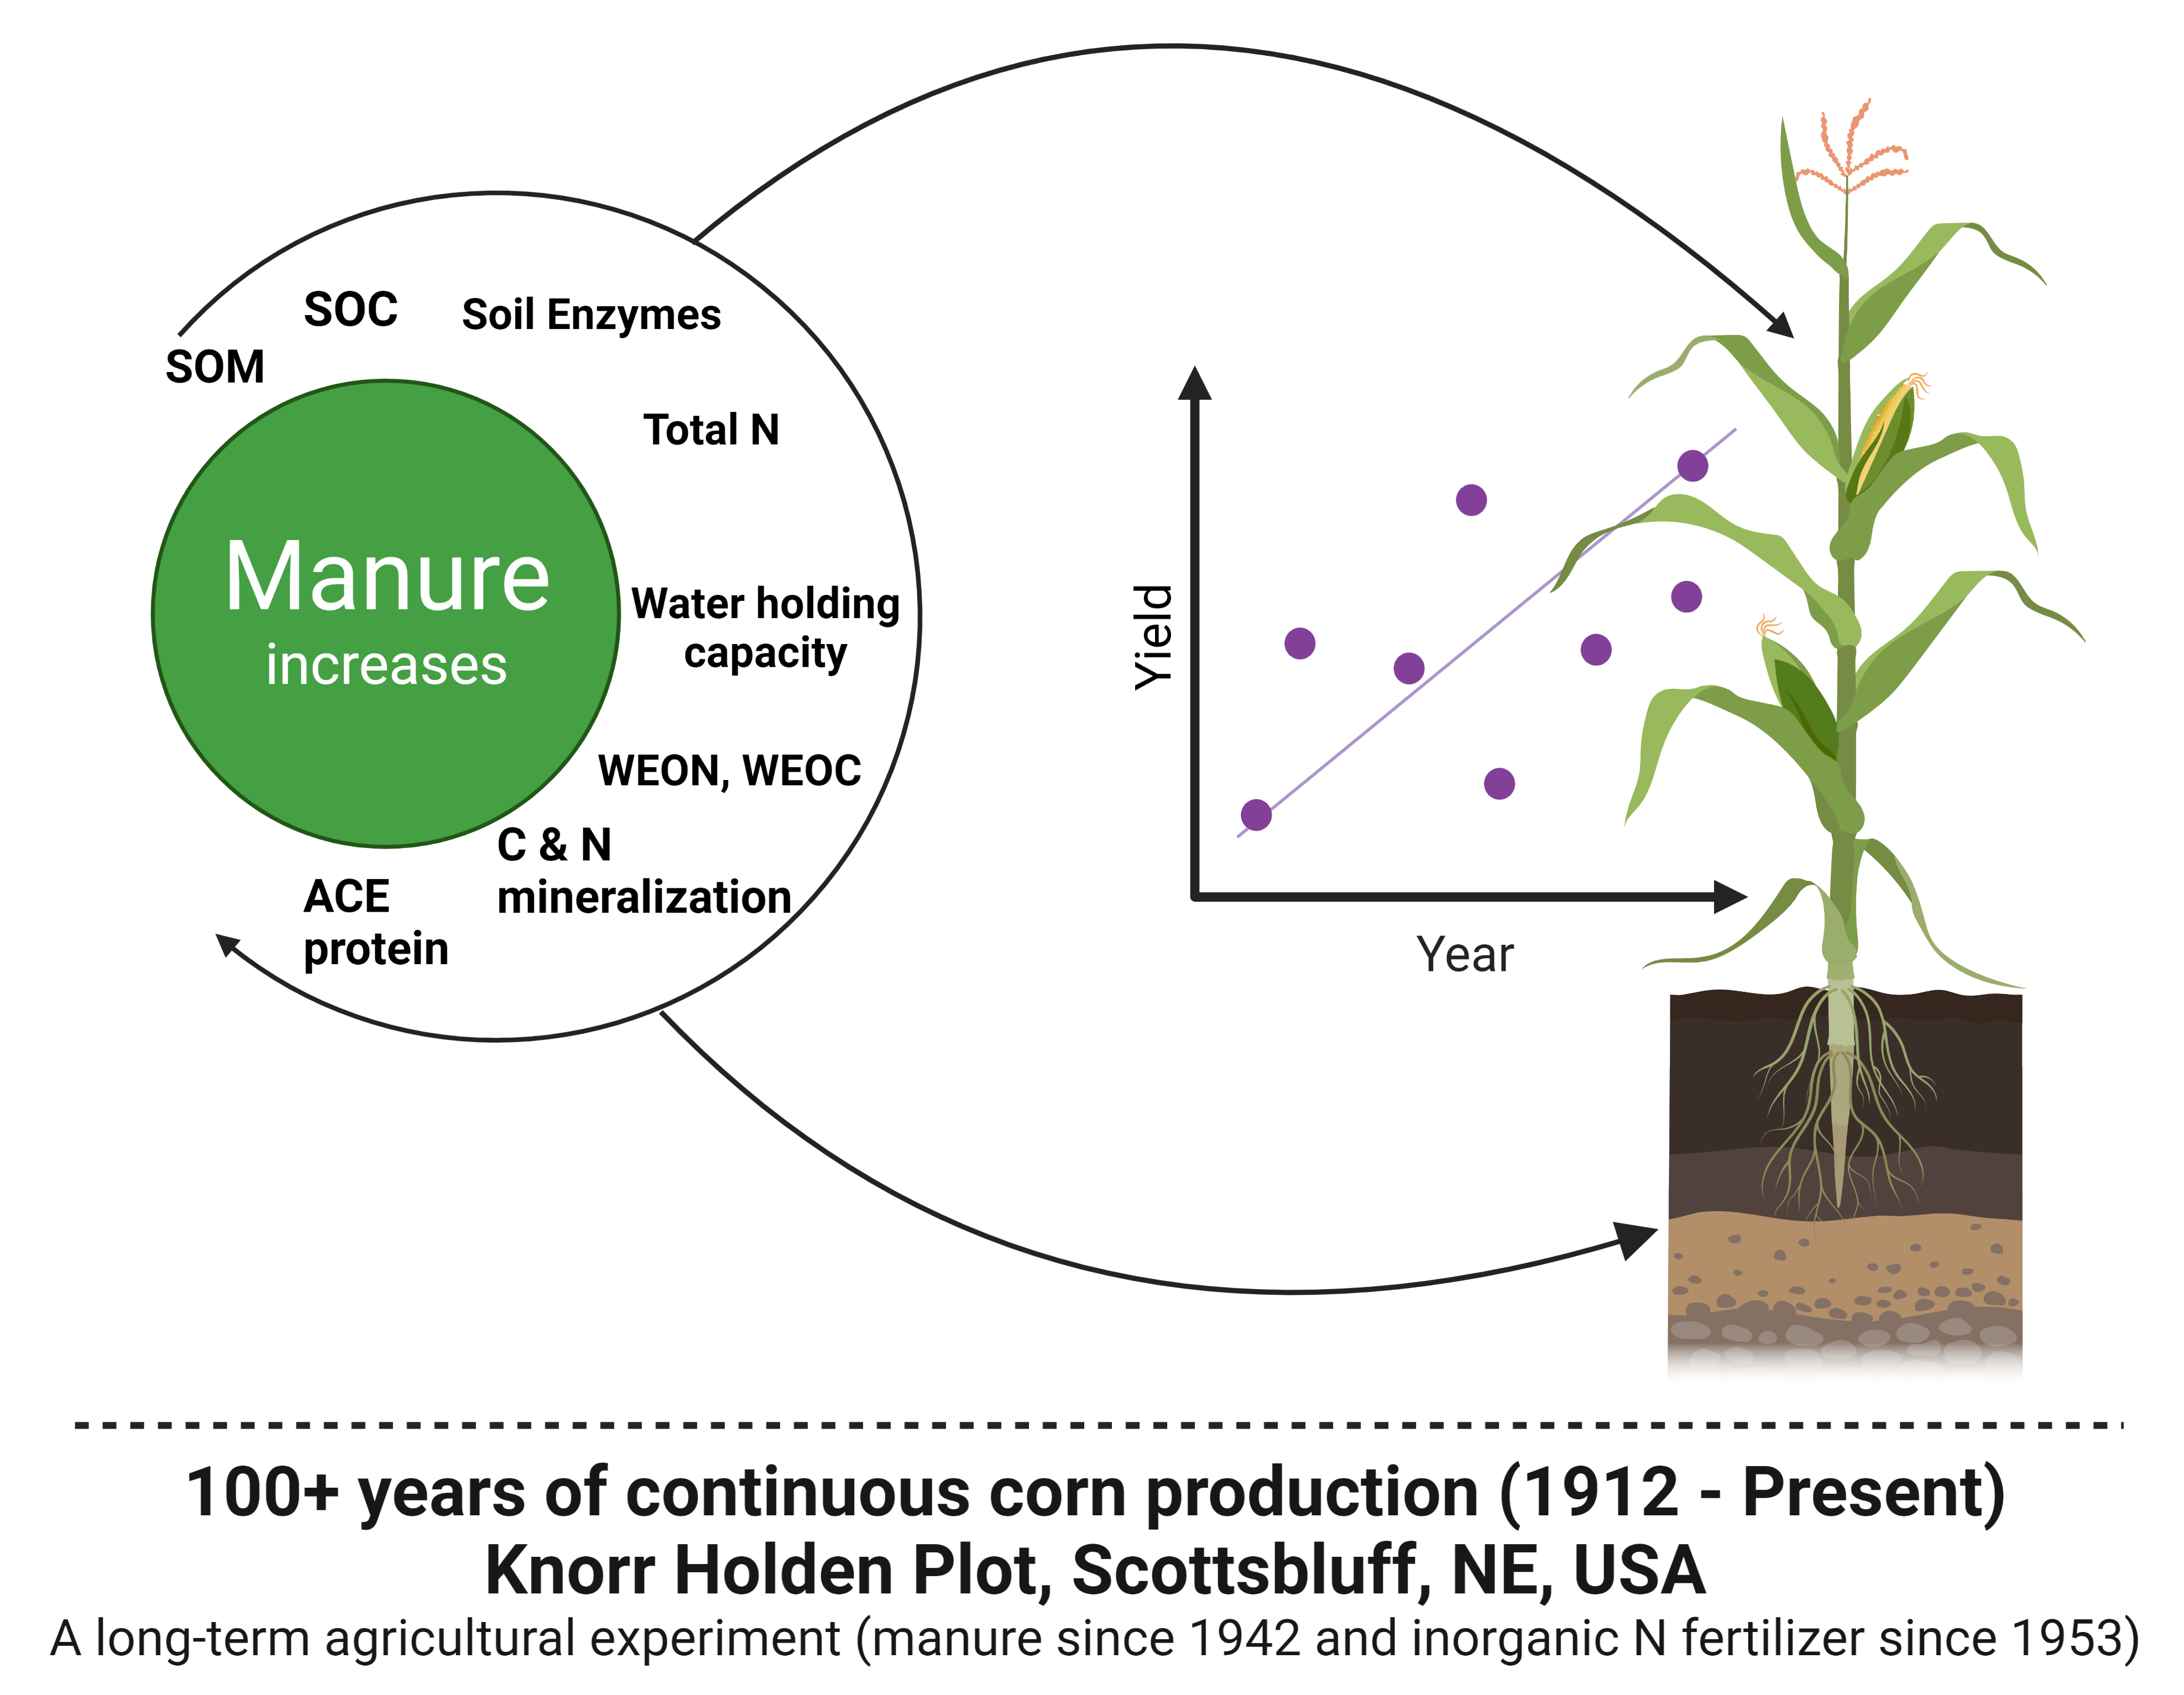 Image showing different manure benefits to corn production